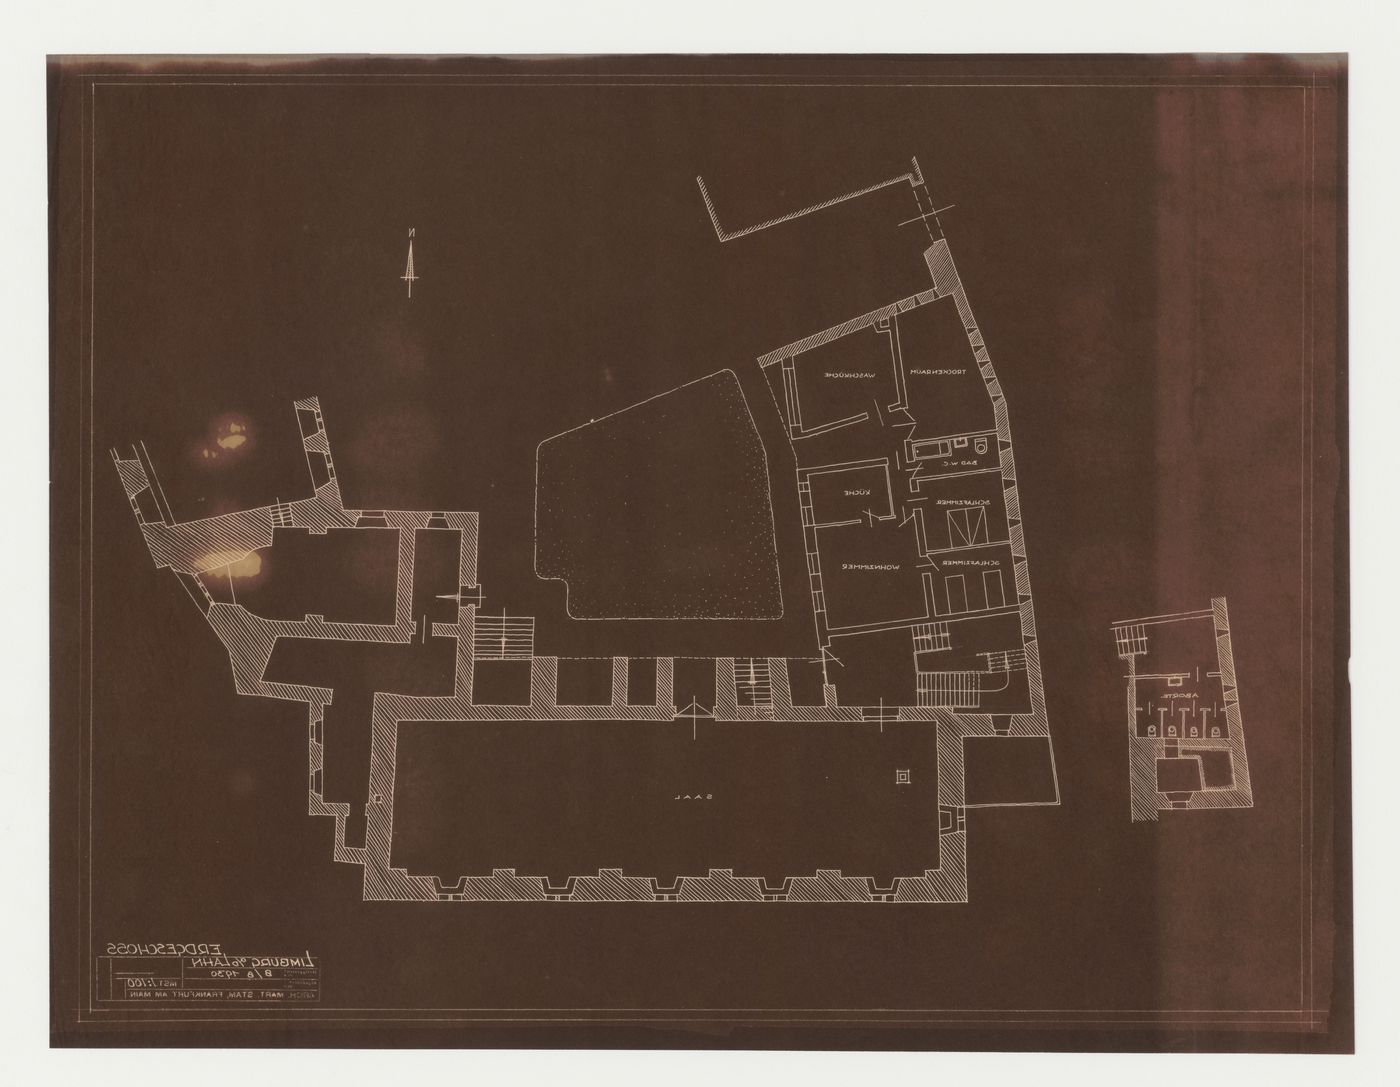 Ground floor plan for an addition to an existing building, possibly a school, Limburg an der Lahn, Germany